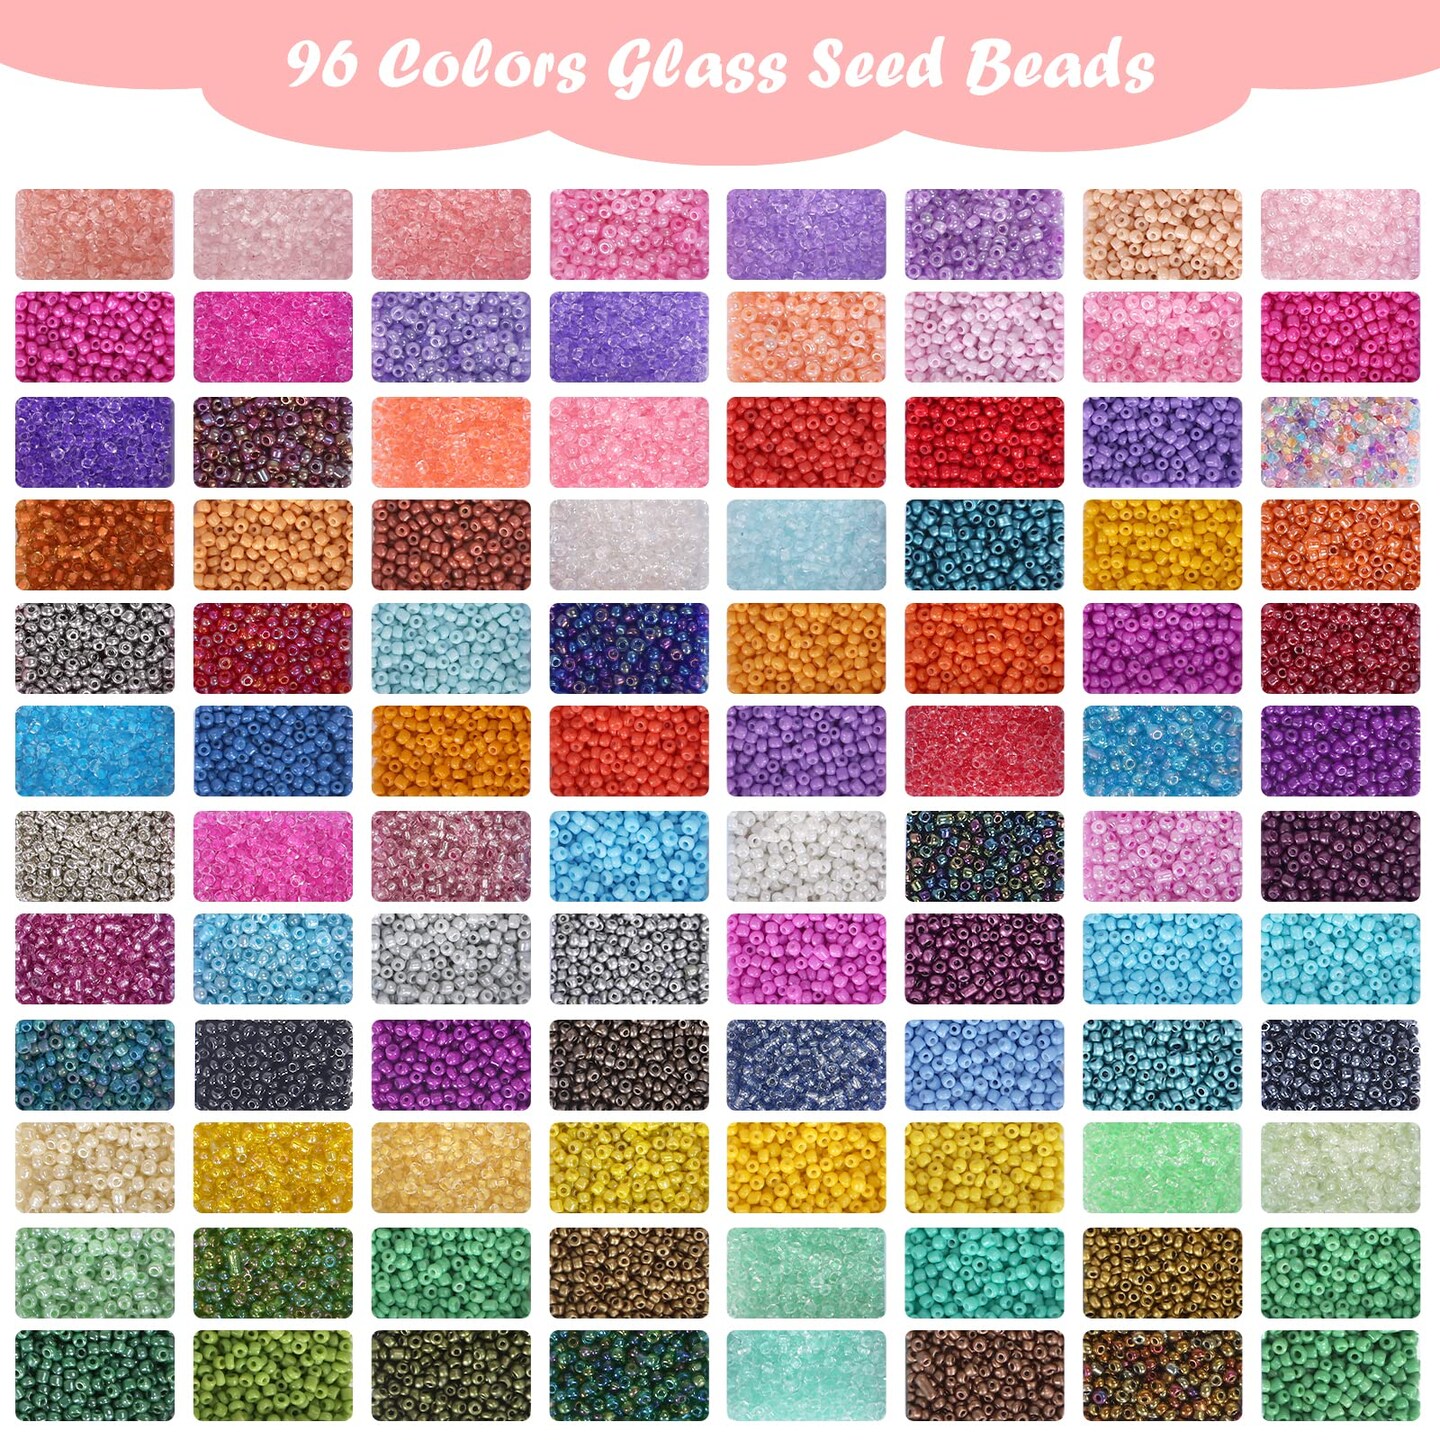 Quefe 45000pcs Glass Seed Beads for Bracelet Making Kit 56 Colors 2mm Small  Beads for Jewelry Making 260pcs Letter Beads for Crafts Gifts